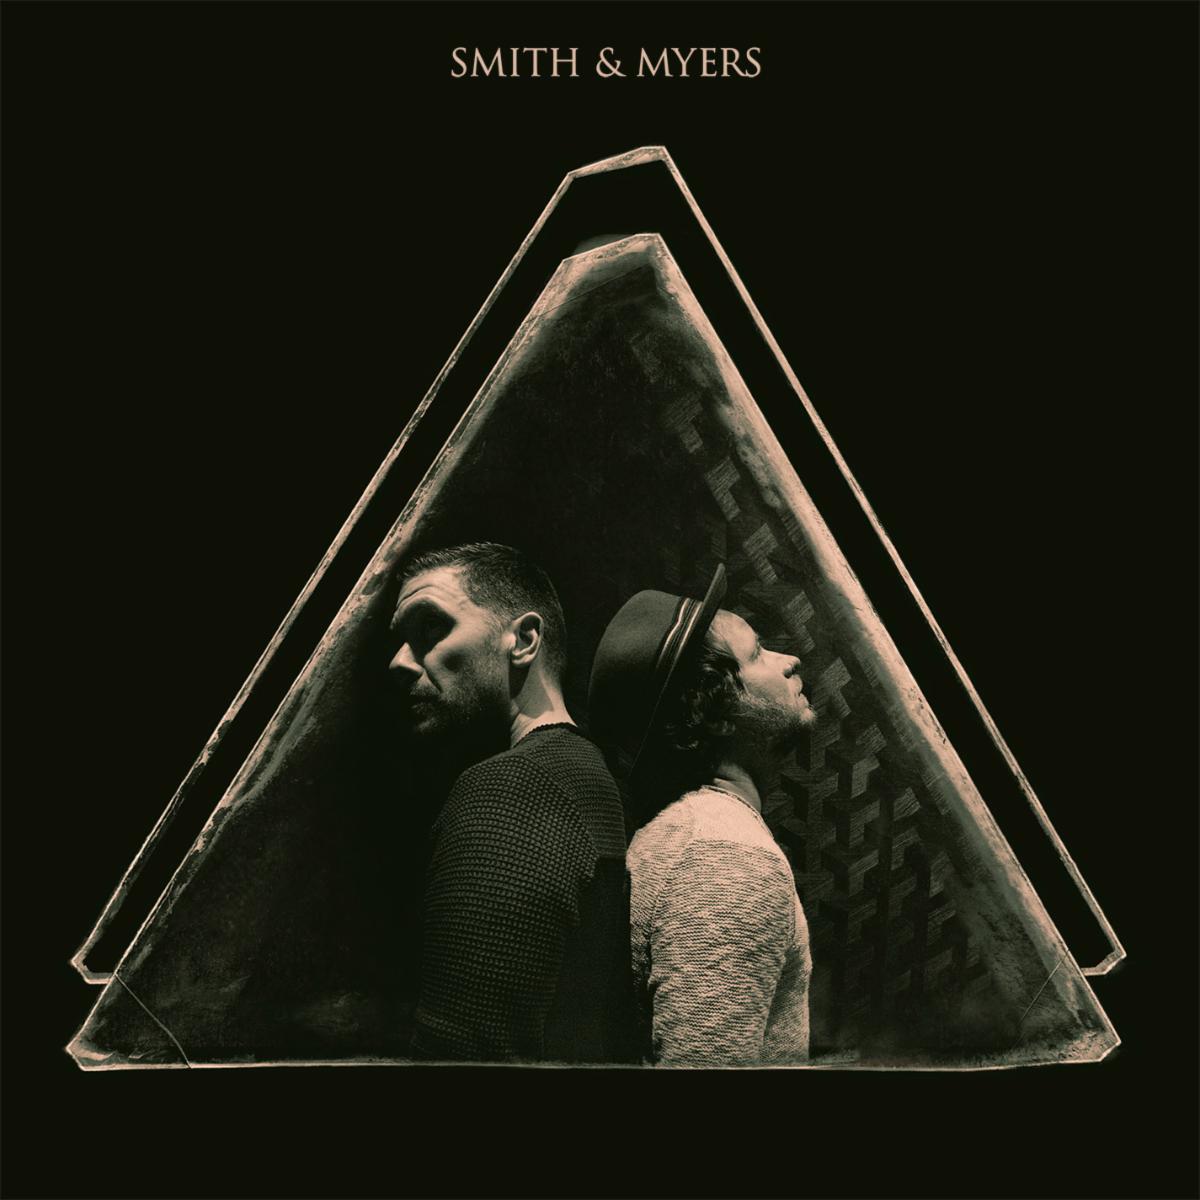 Brent Smith & Zach Myers (Smith & Myers) Release Dual Songs "Bad At Love" & Re-Imagining of "Bad Guy"